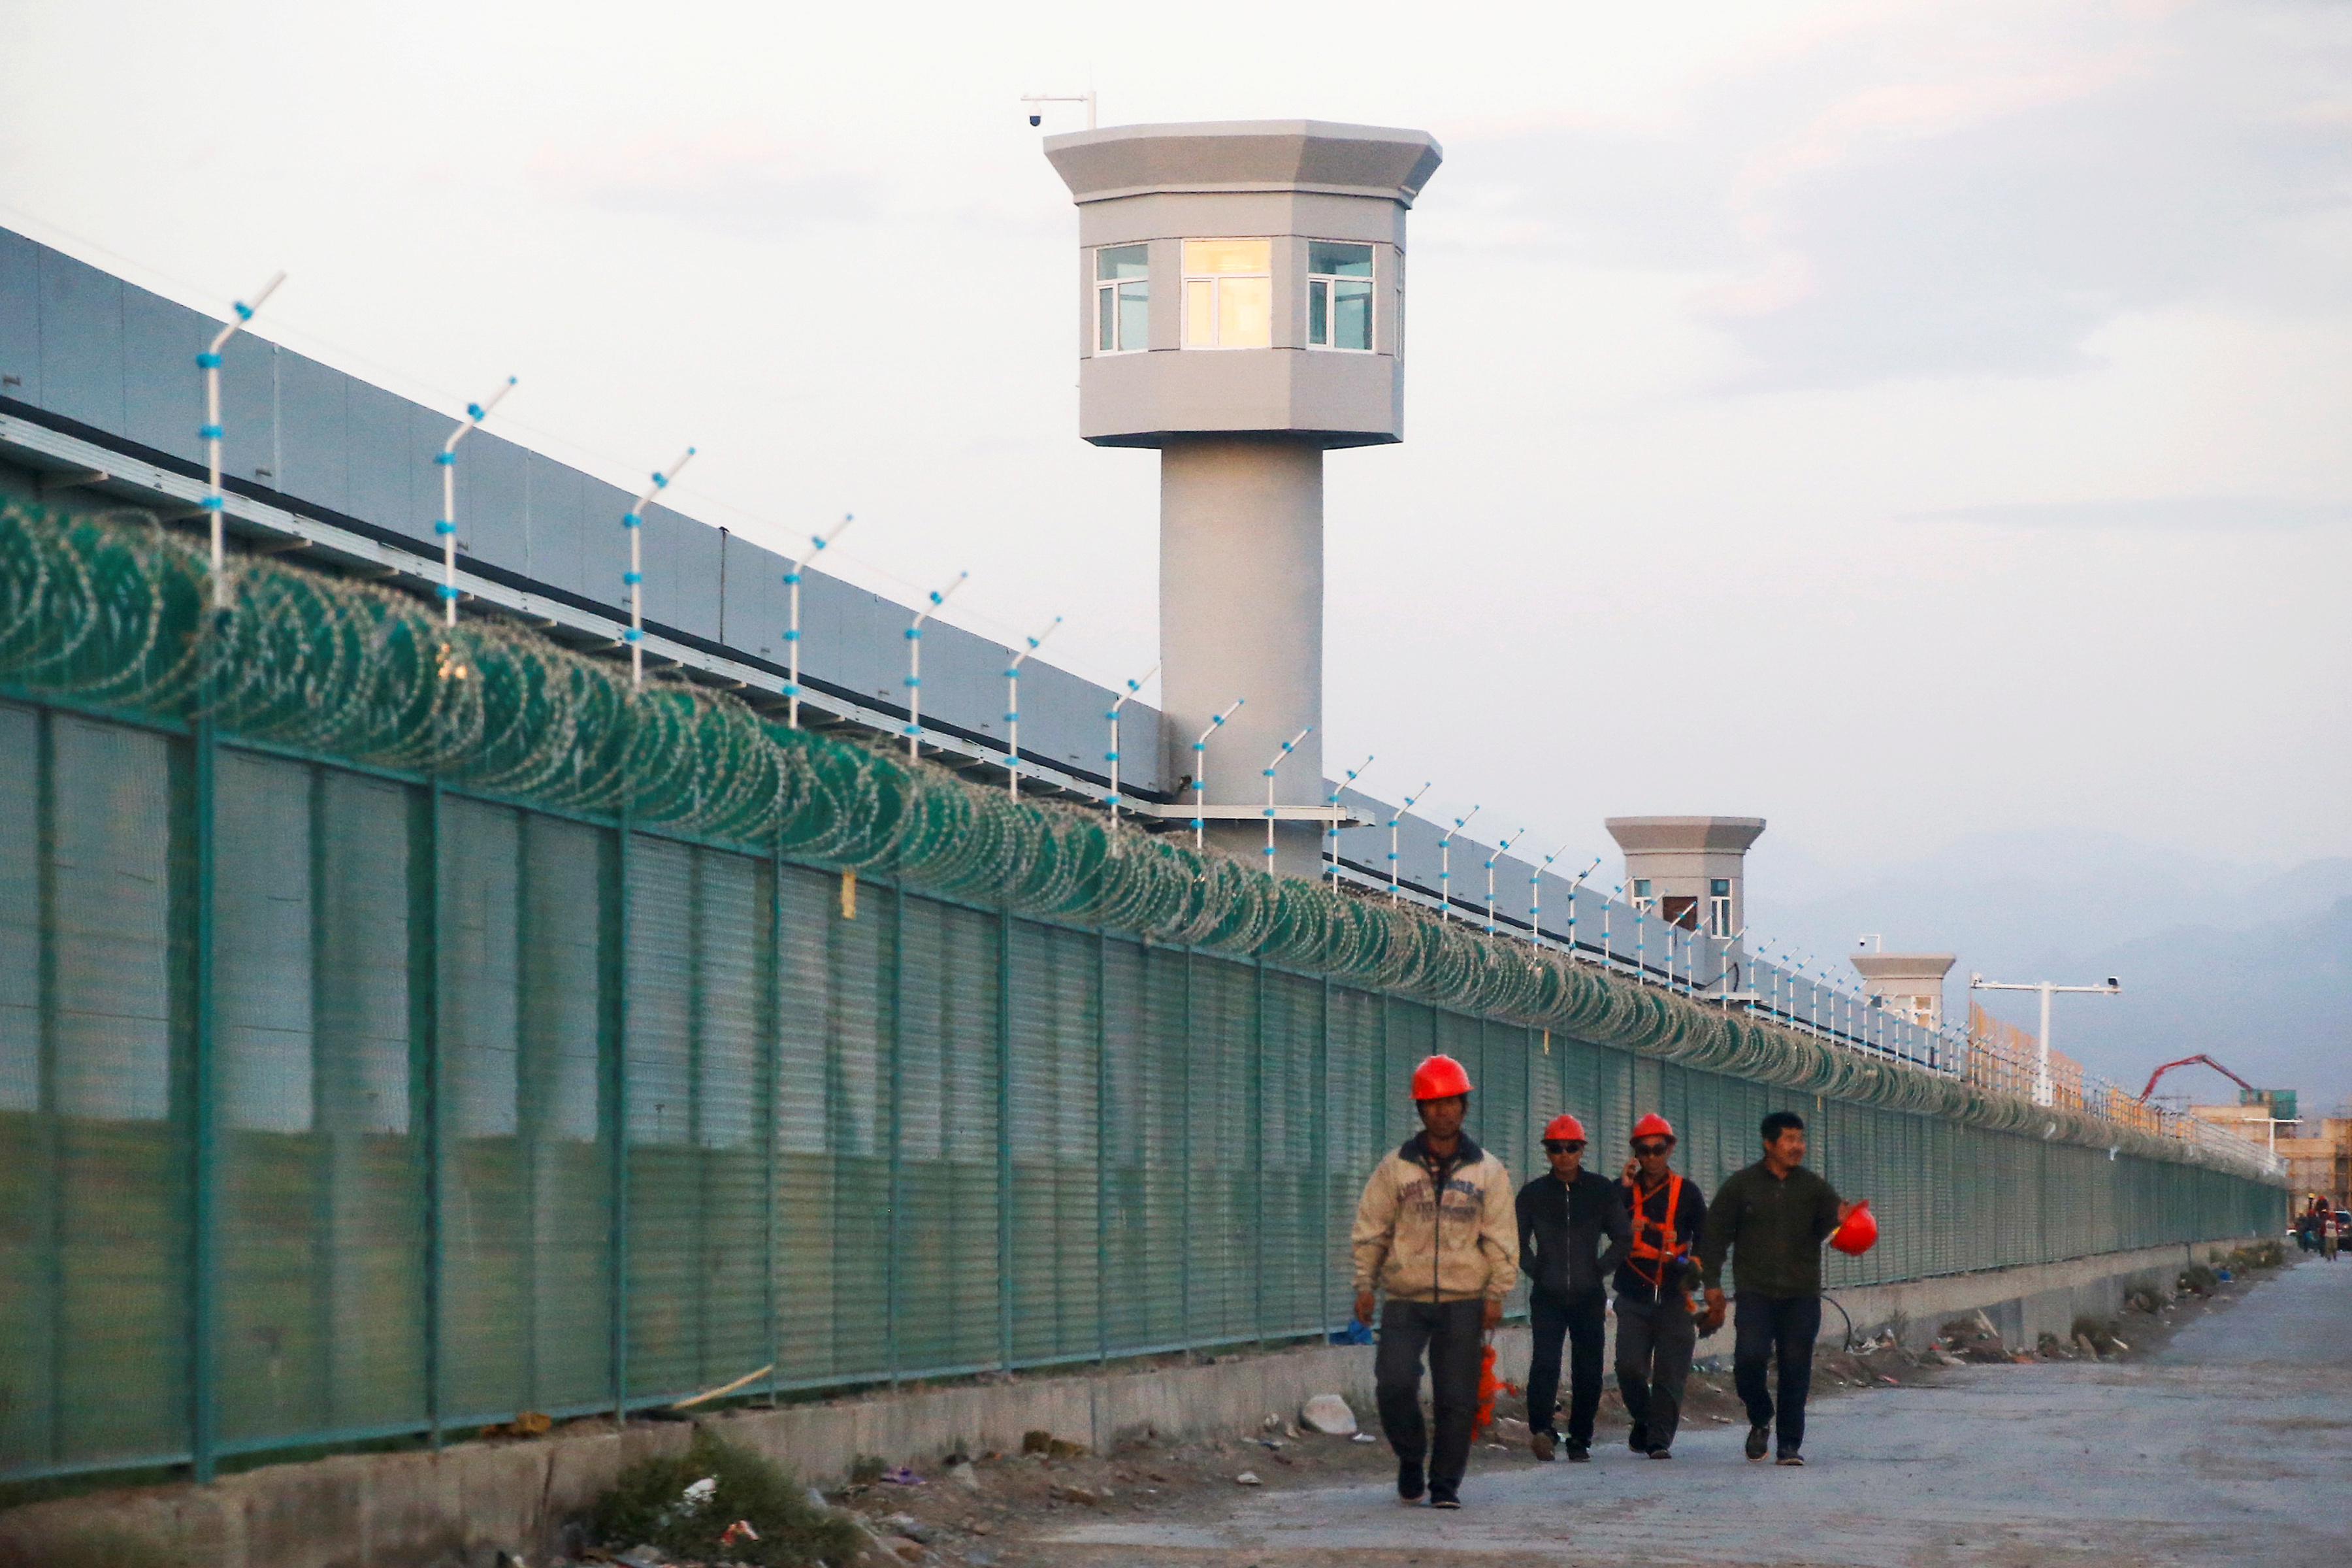 Workers walk by the perimeter fence of what is officially known as a vocational skills education centre in Dabancheng